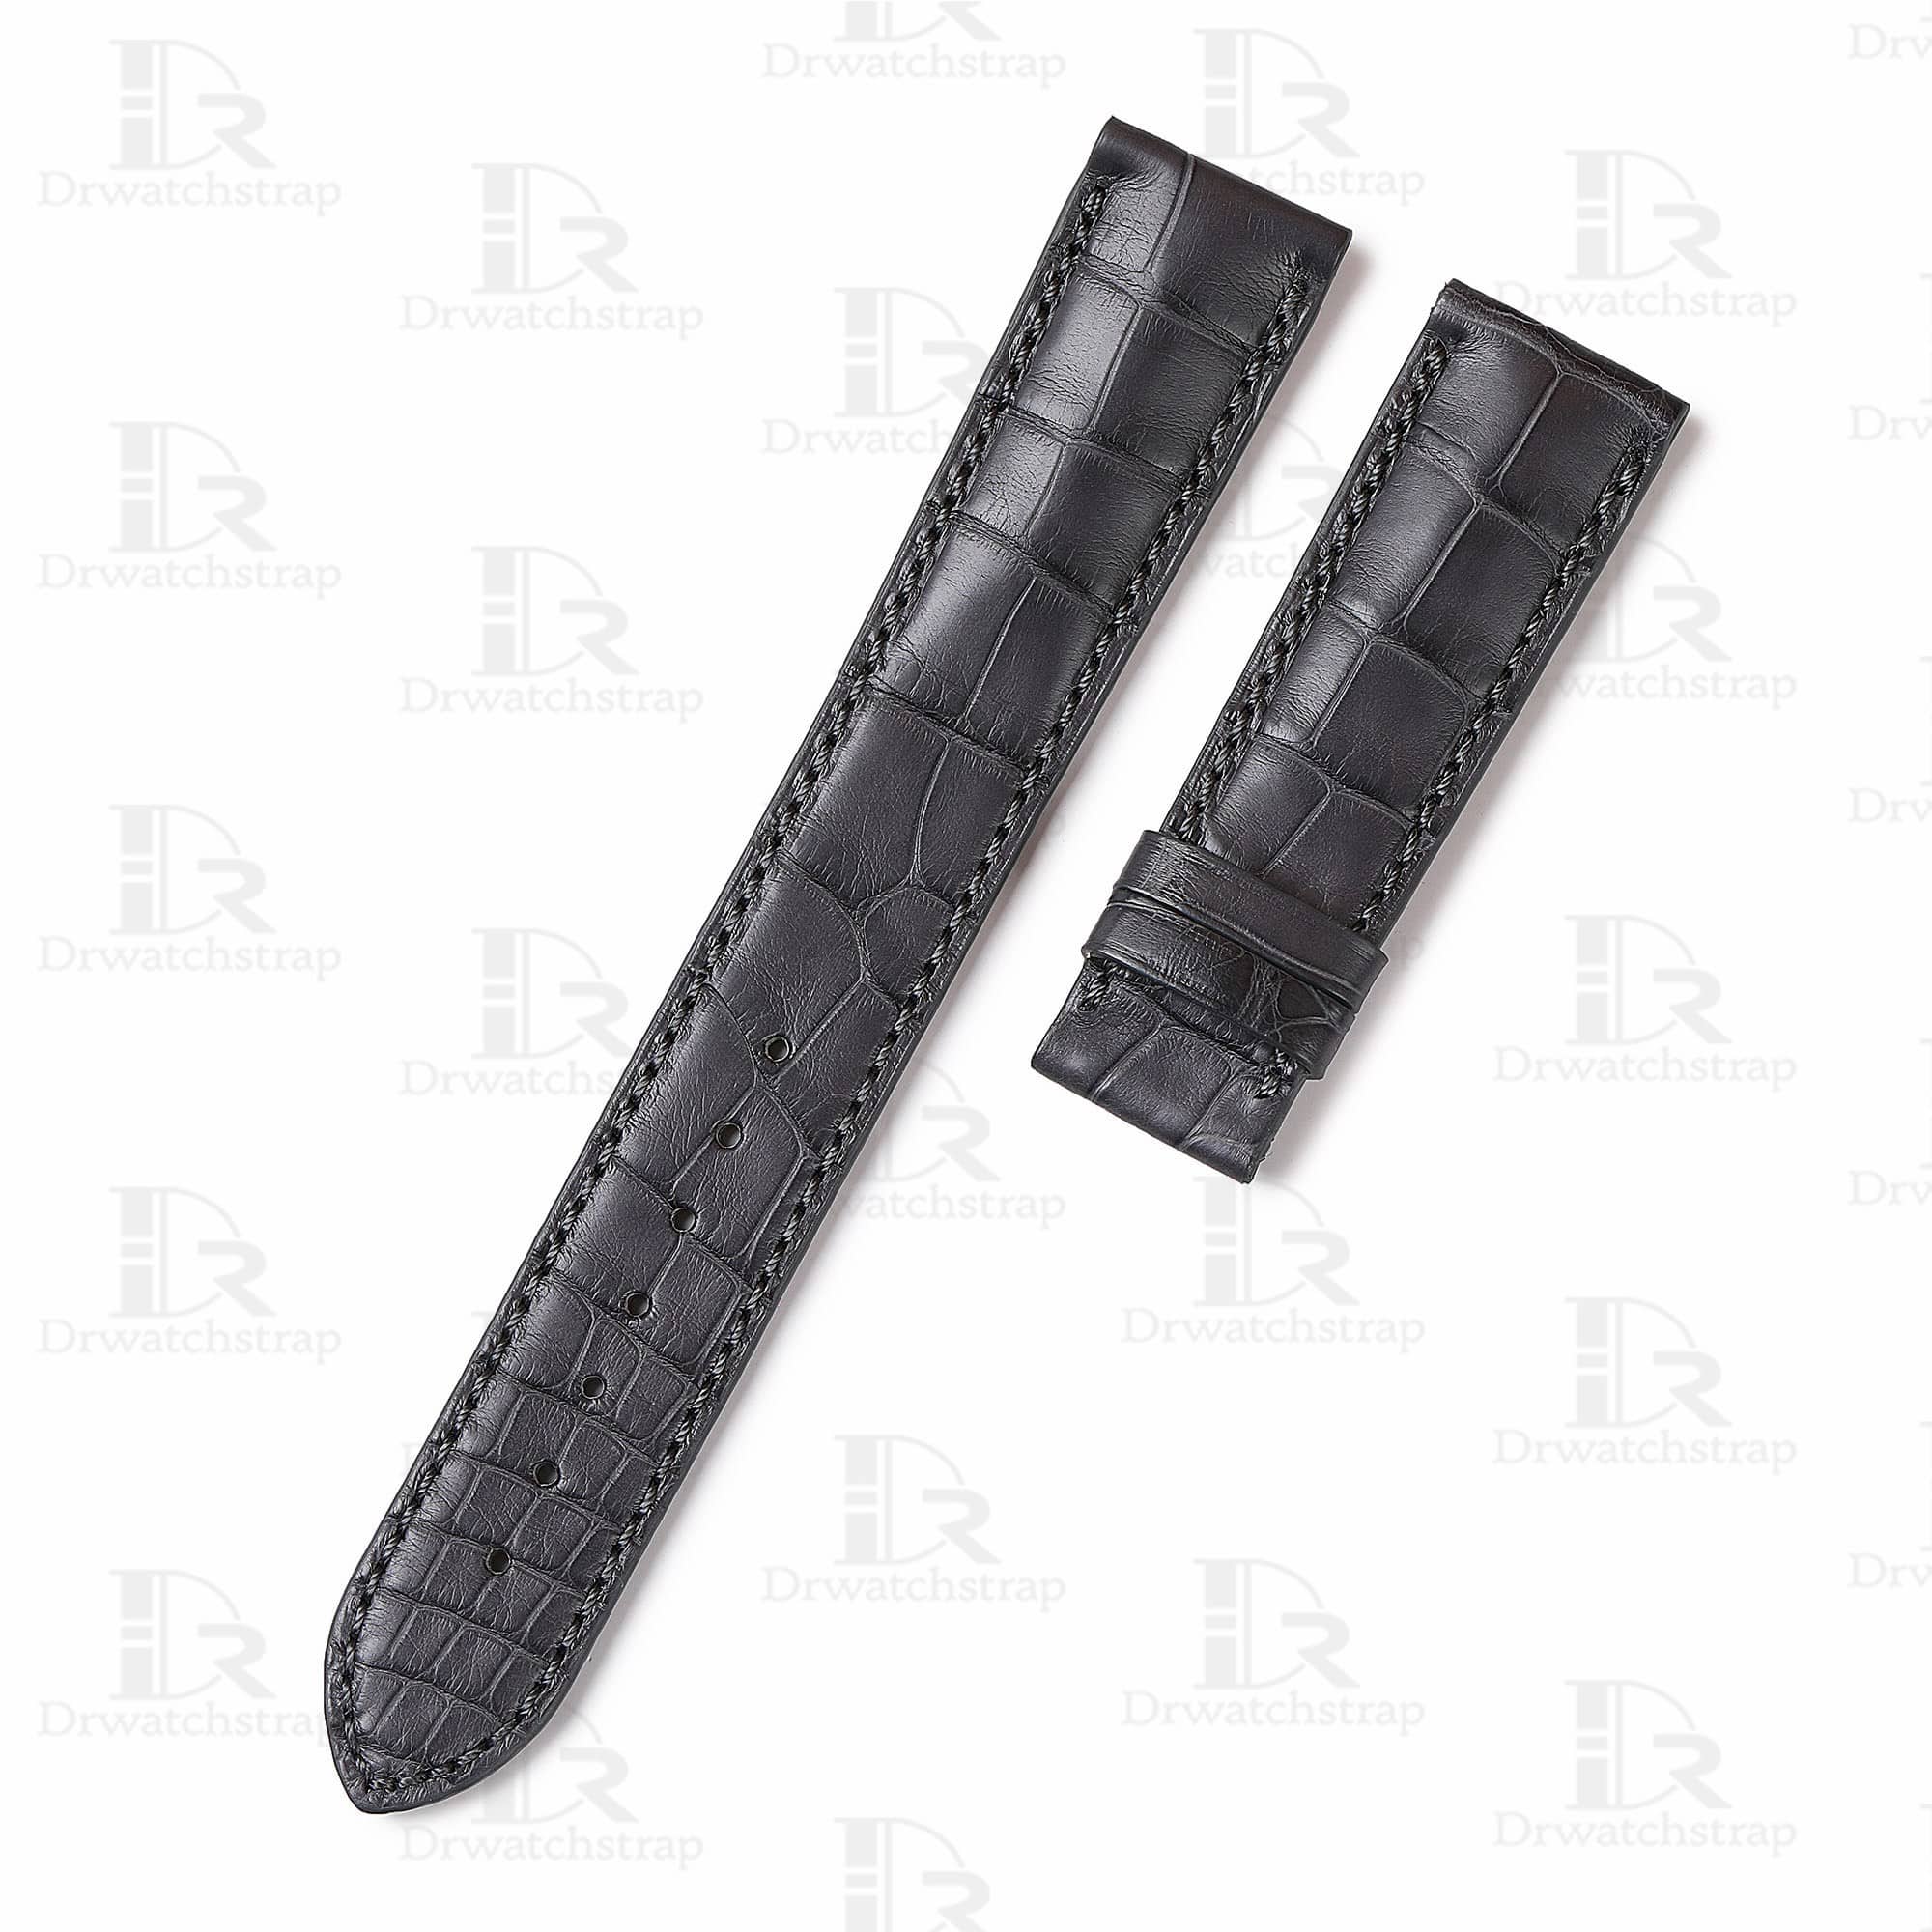 Buy Custom grey Alligator leather watch strap for Grand Seiko band replacement watchband for sale